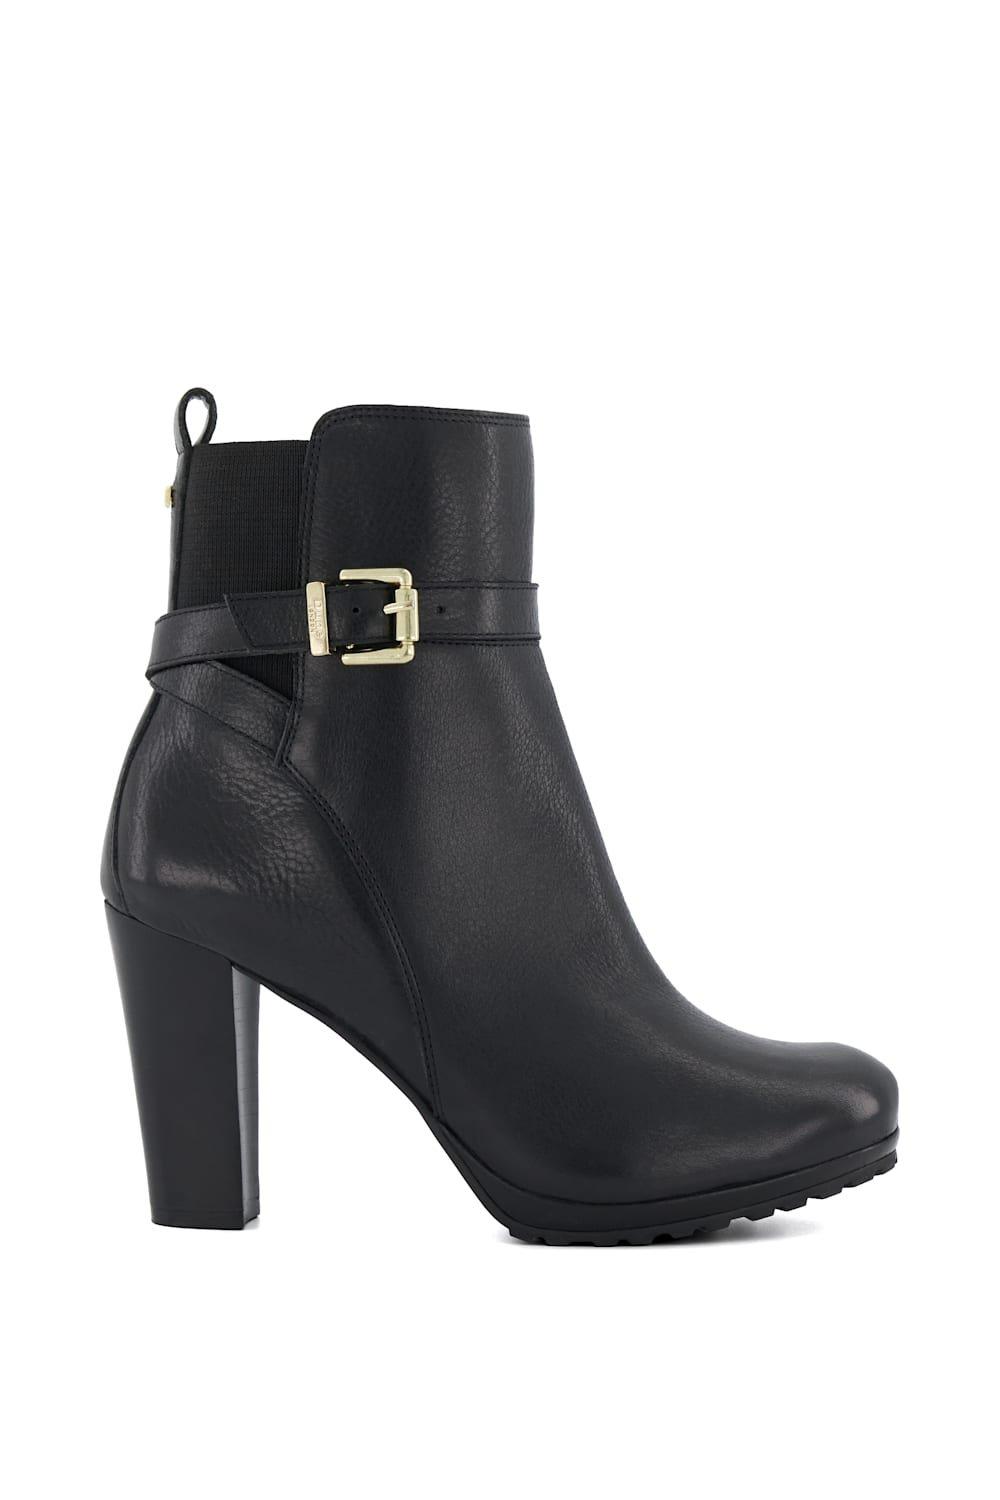 Boots | 'Orielle' Leather Ankle Boots | Dune London